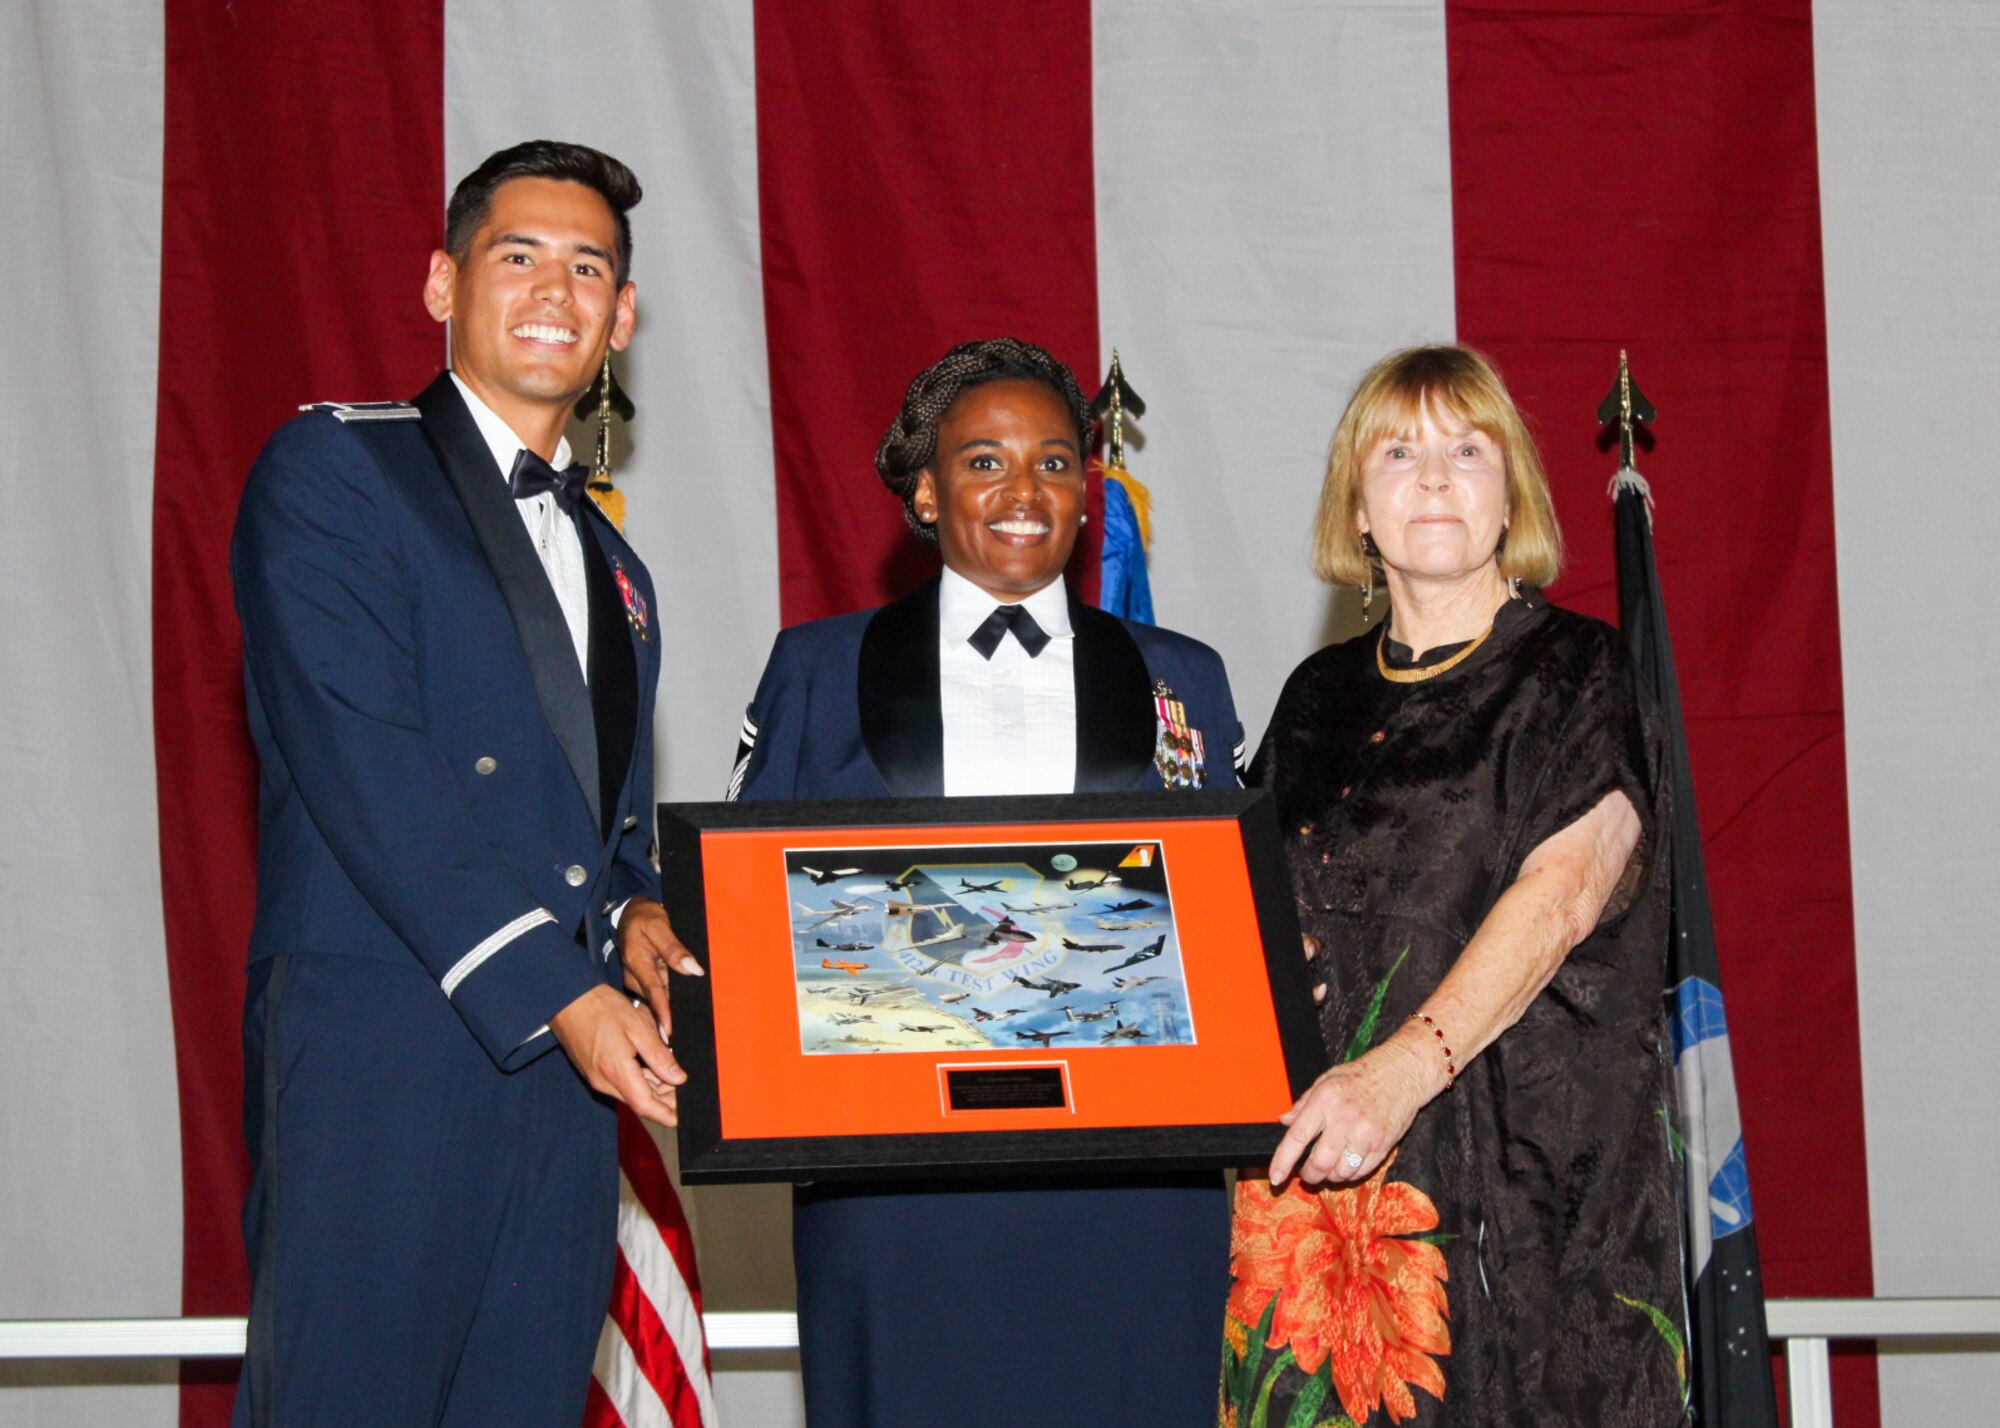 The 2022 Department of the Air Force Ball committee members presents a gift of appreciation to Barbara Schultz, the keynote speaker at the DAF Ball, at Edwards Air Force Base, California, Sept. 16. (Air Force photo by Laura Maples)